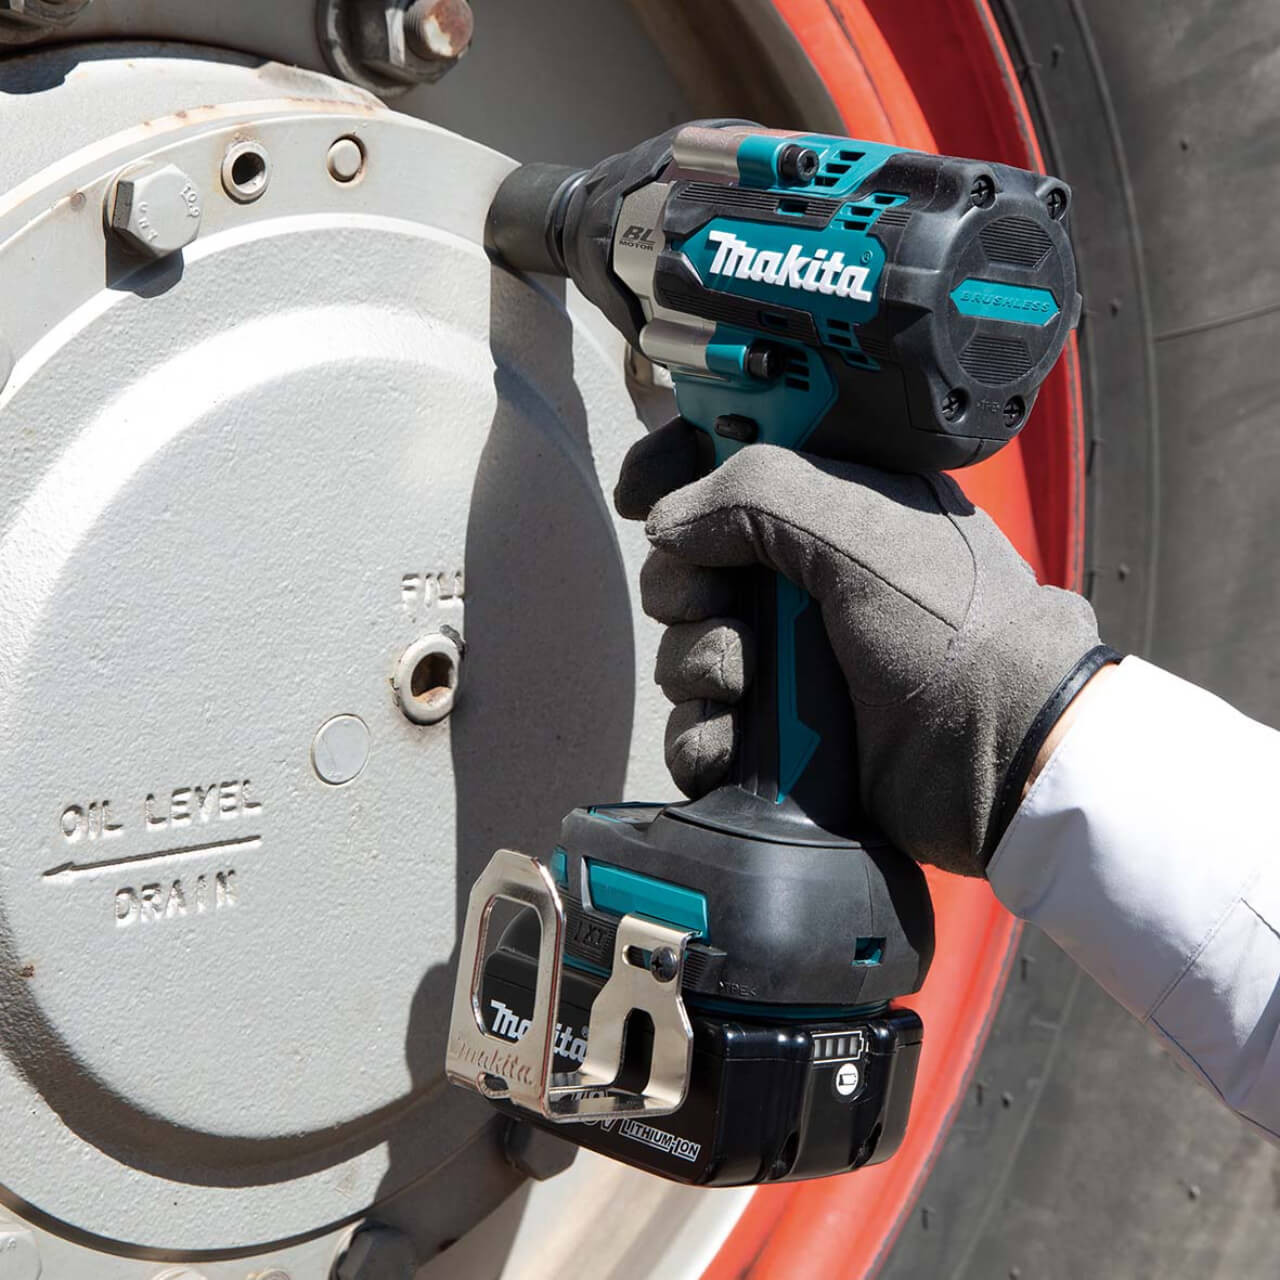 Makita 18V BRUSHLESS 1/2” Detent Pin Impact Wrench. 700Nm - Includes 2 x 5.0Ah Batteries. Rapid Charger & Makpac Case